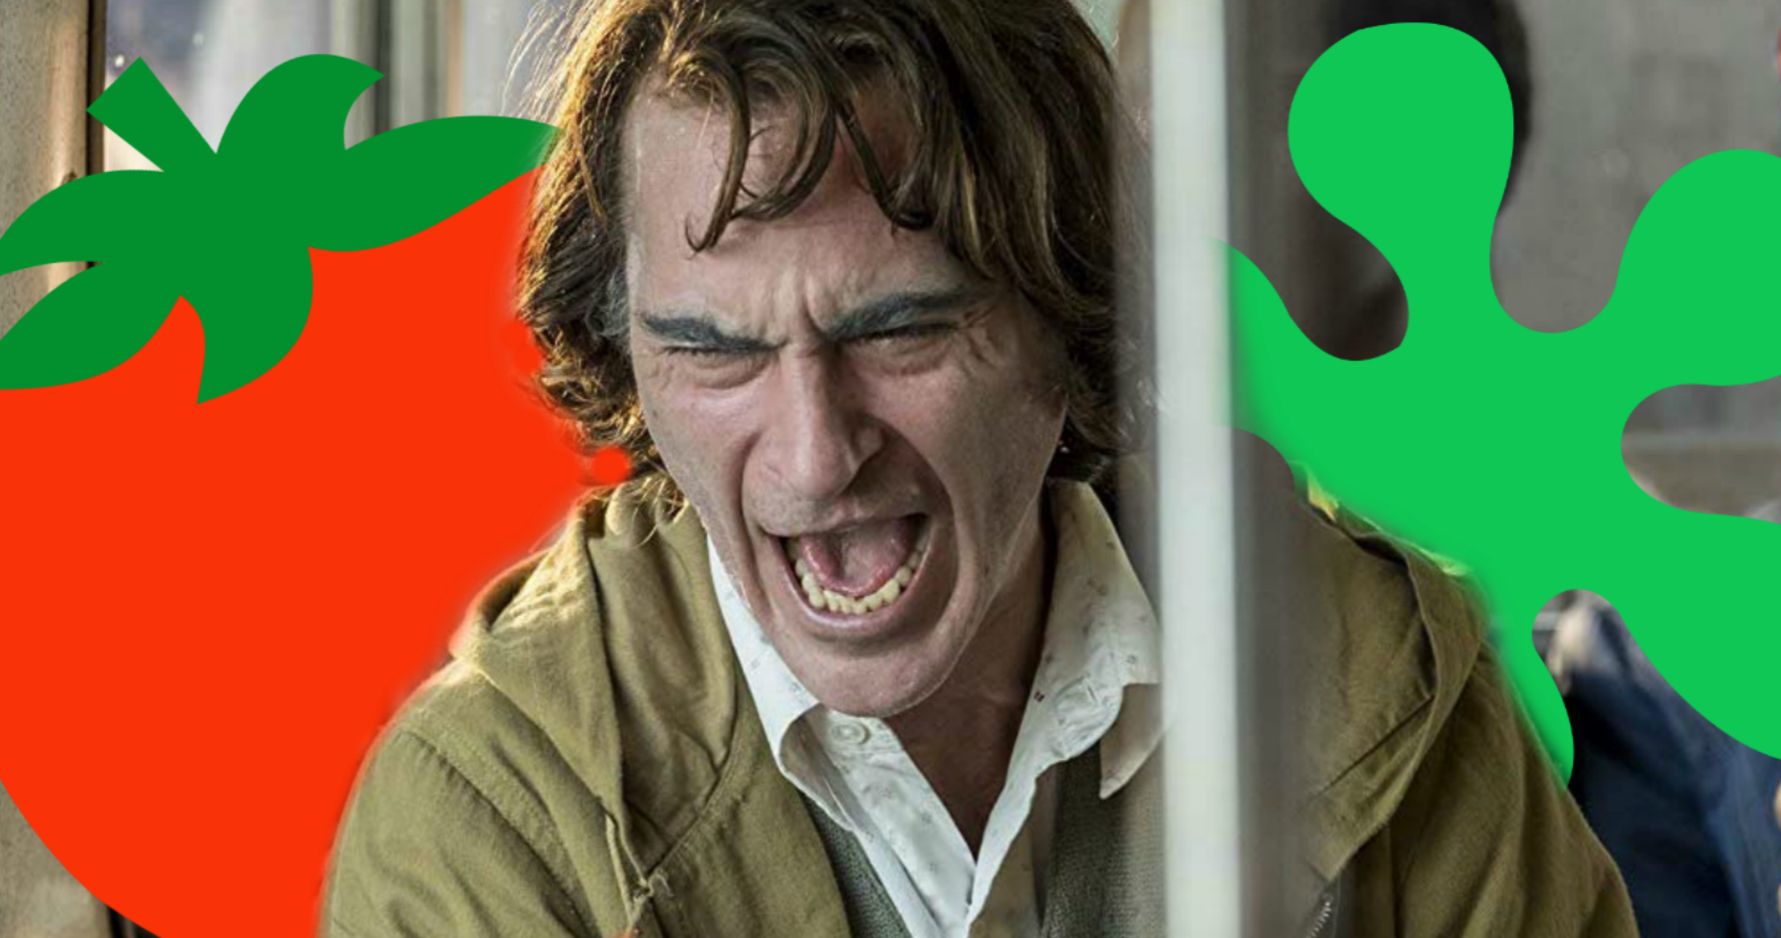 Joker Rotten Tomatoes Score Dips After Influx of Negative Reviews